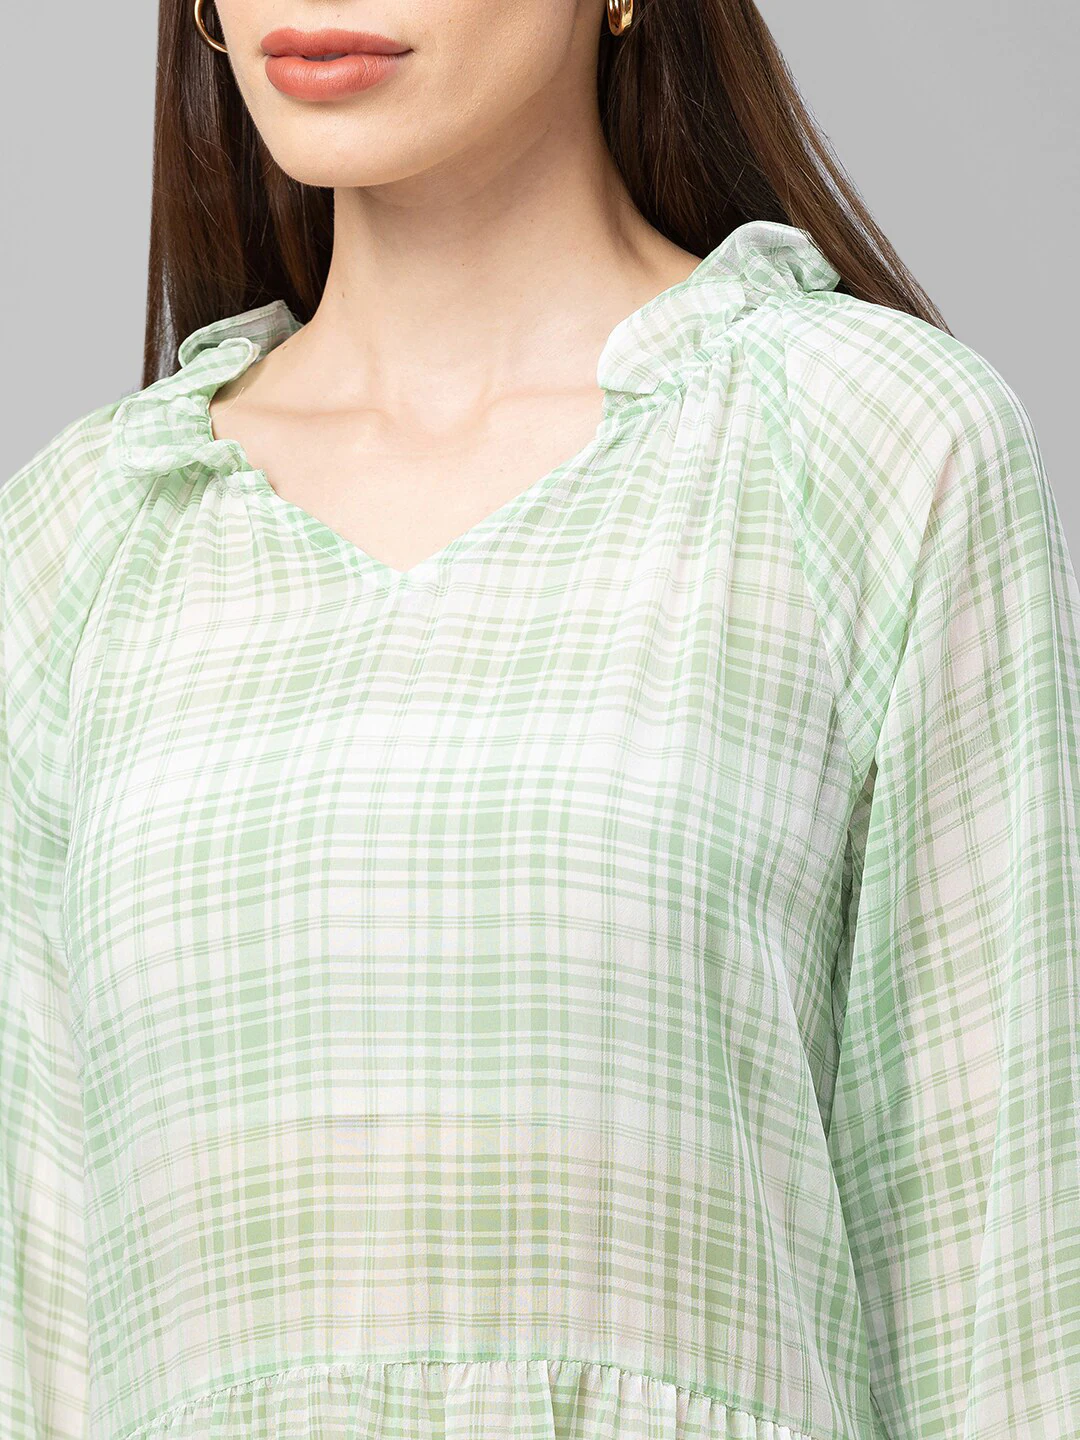 Globus Green Checked A-Line Dress